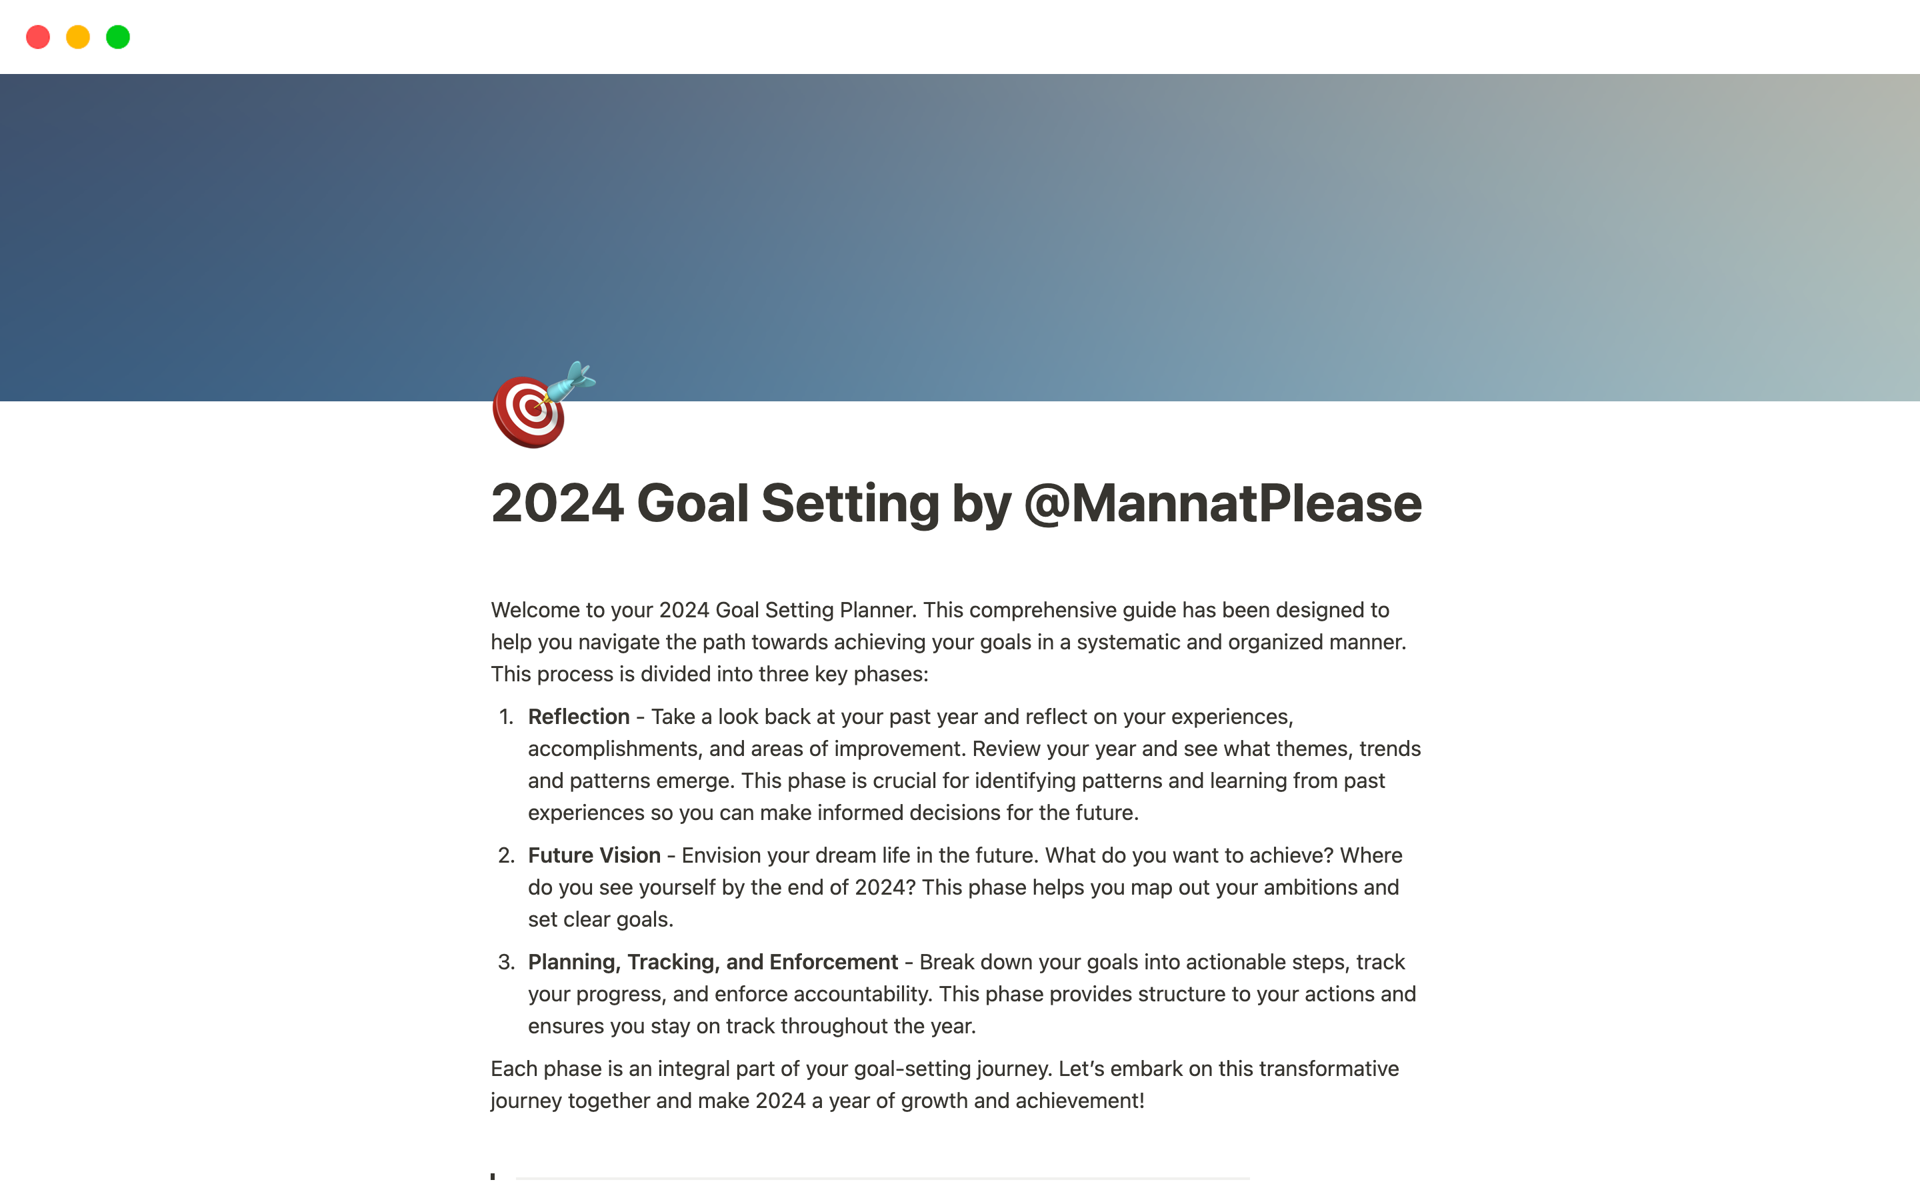 A comprehensive guide to goal setting for a successful 2024.